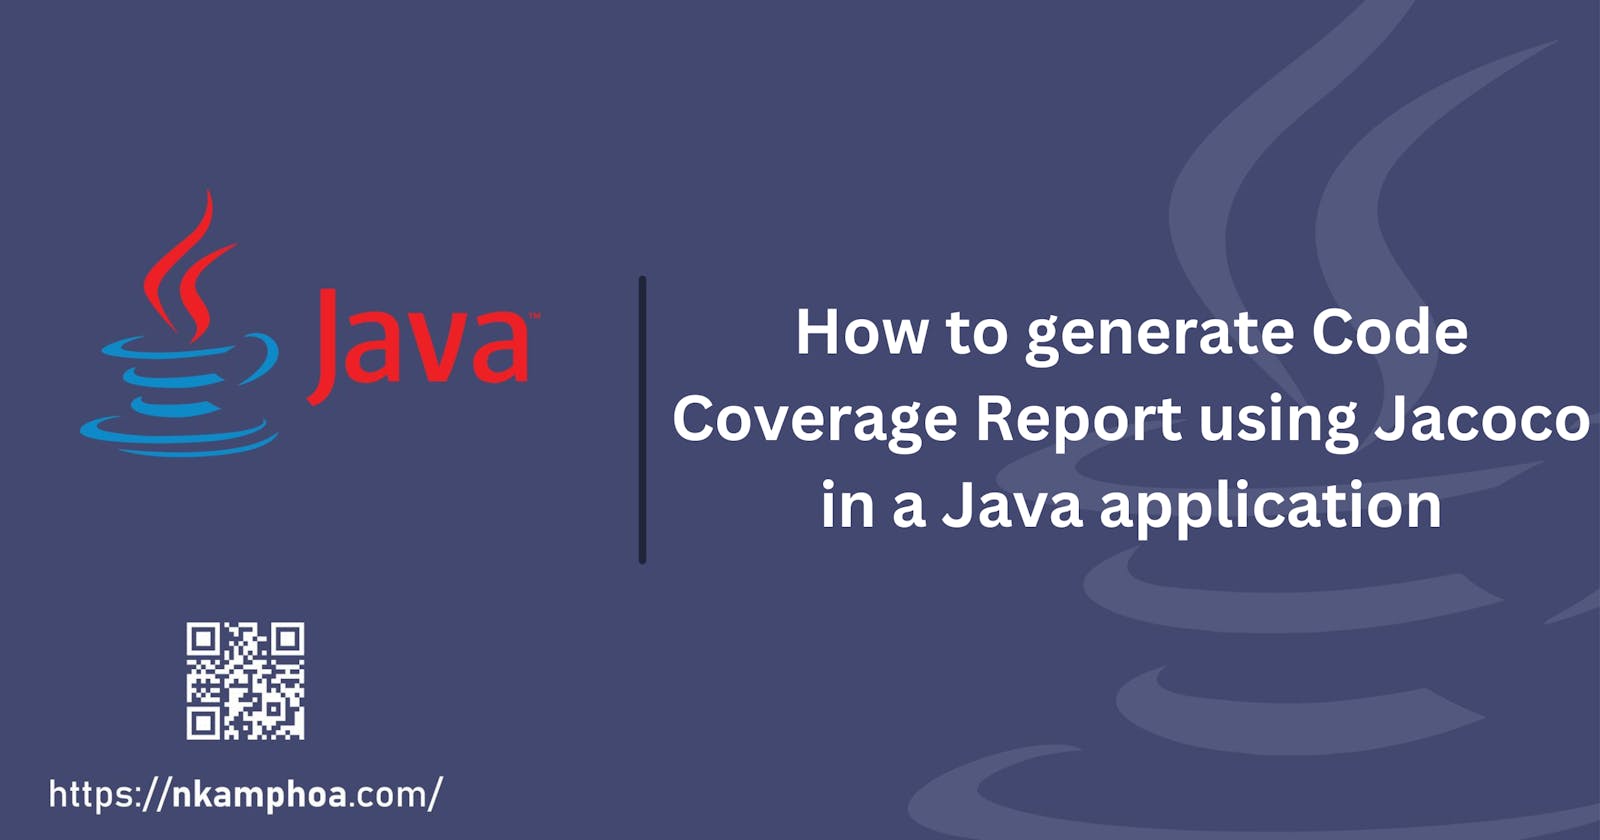 How to generate Code Coverage Report using Jacoco in a Java application